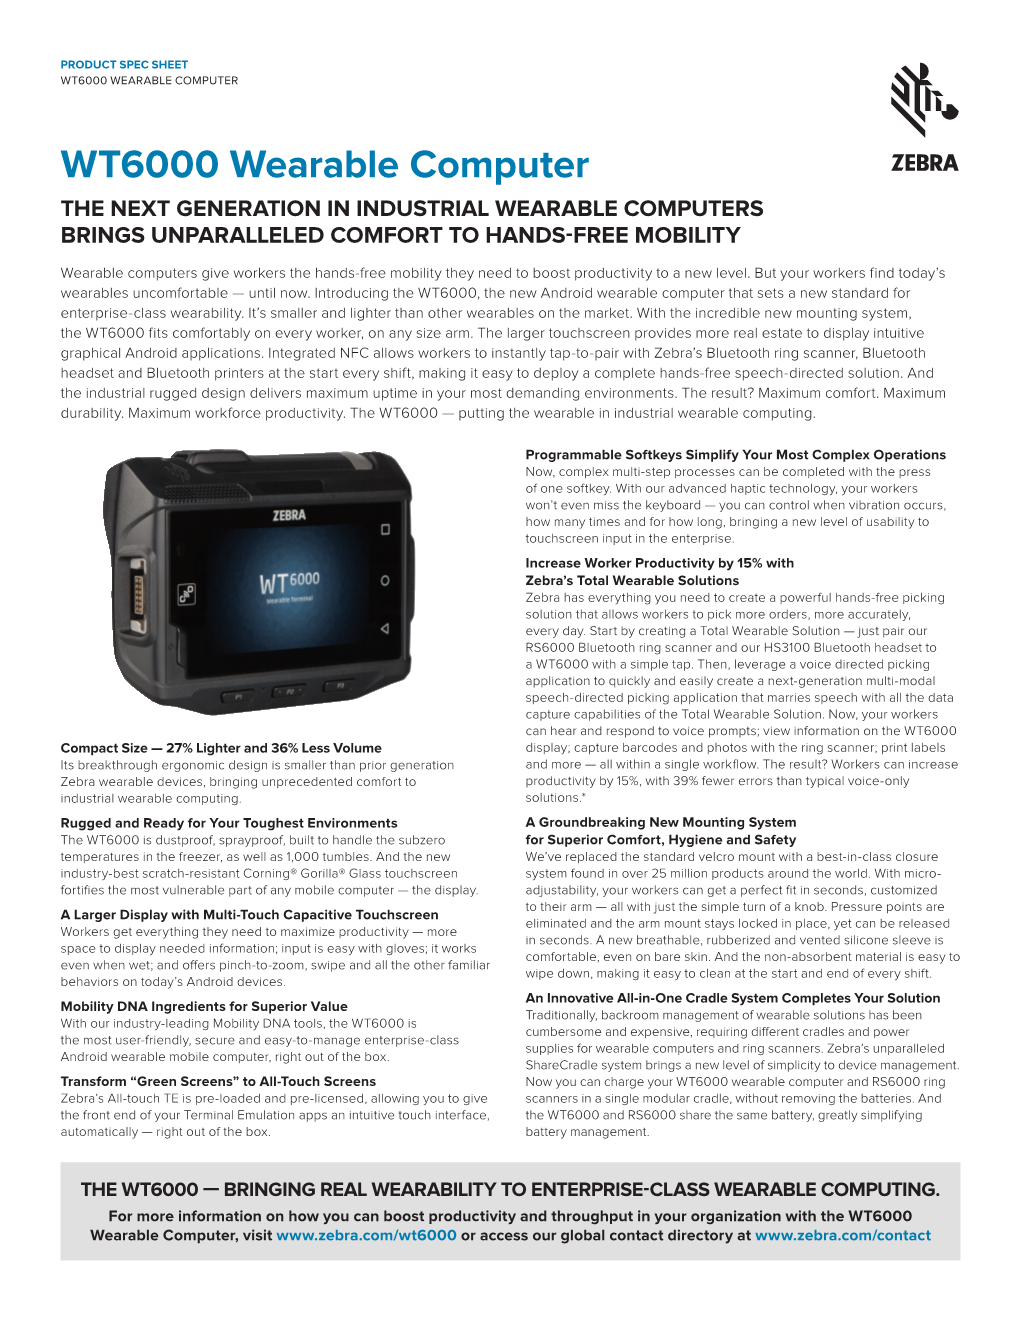 WT6000 Wearable Computer Specification Sheet